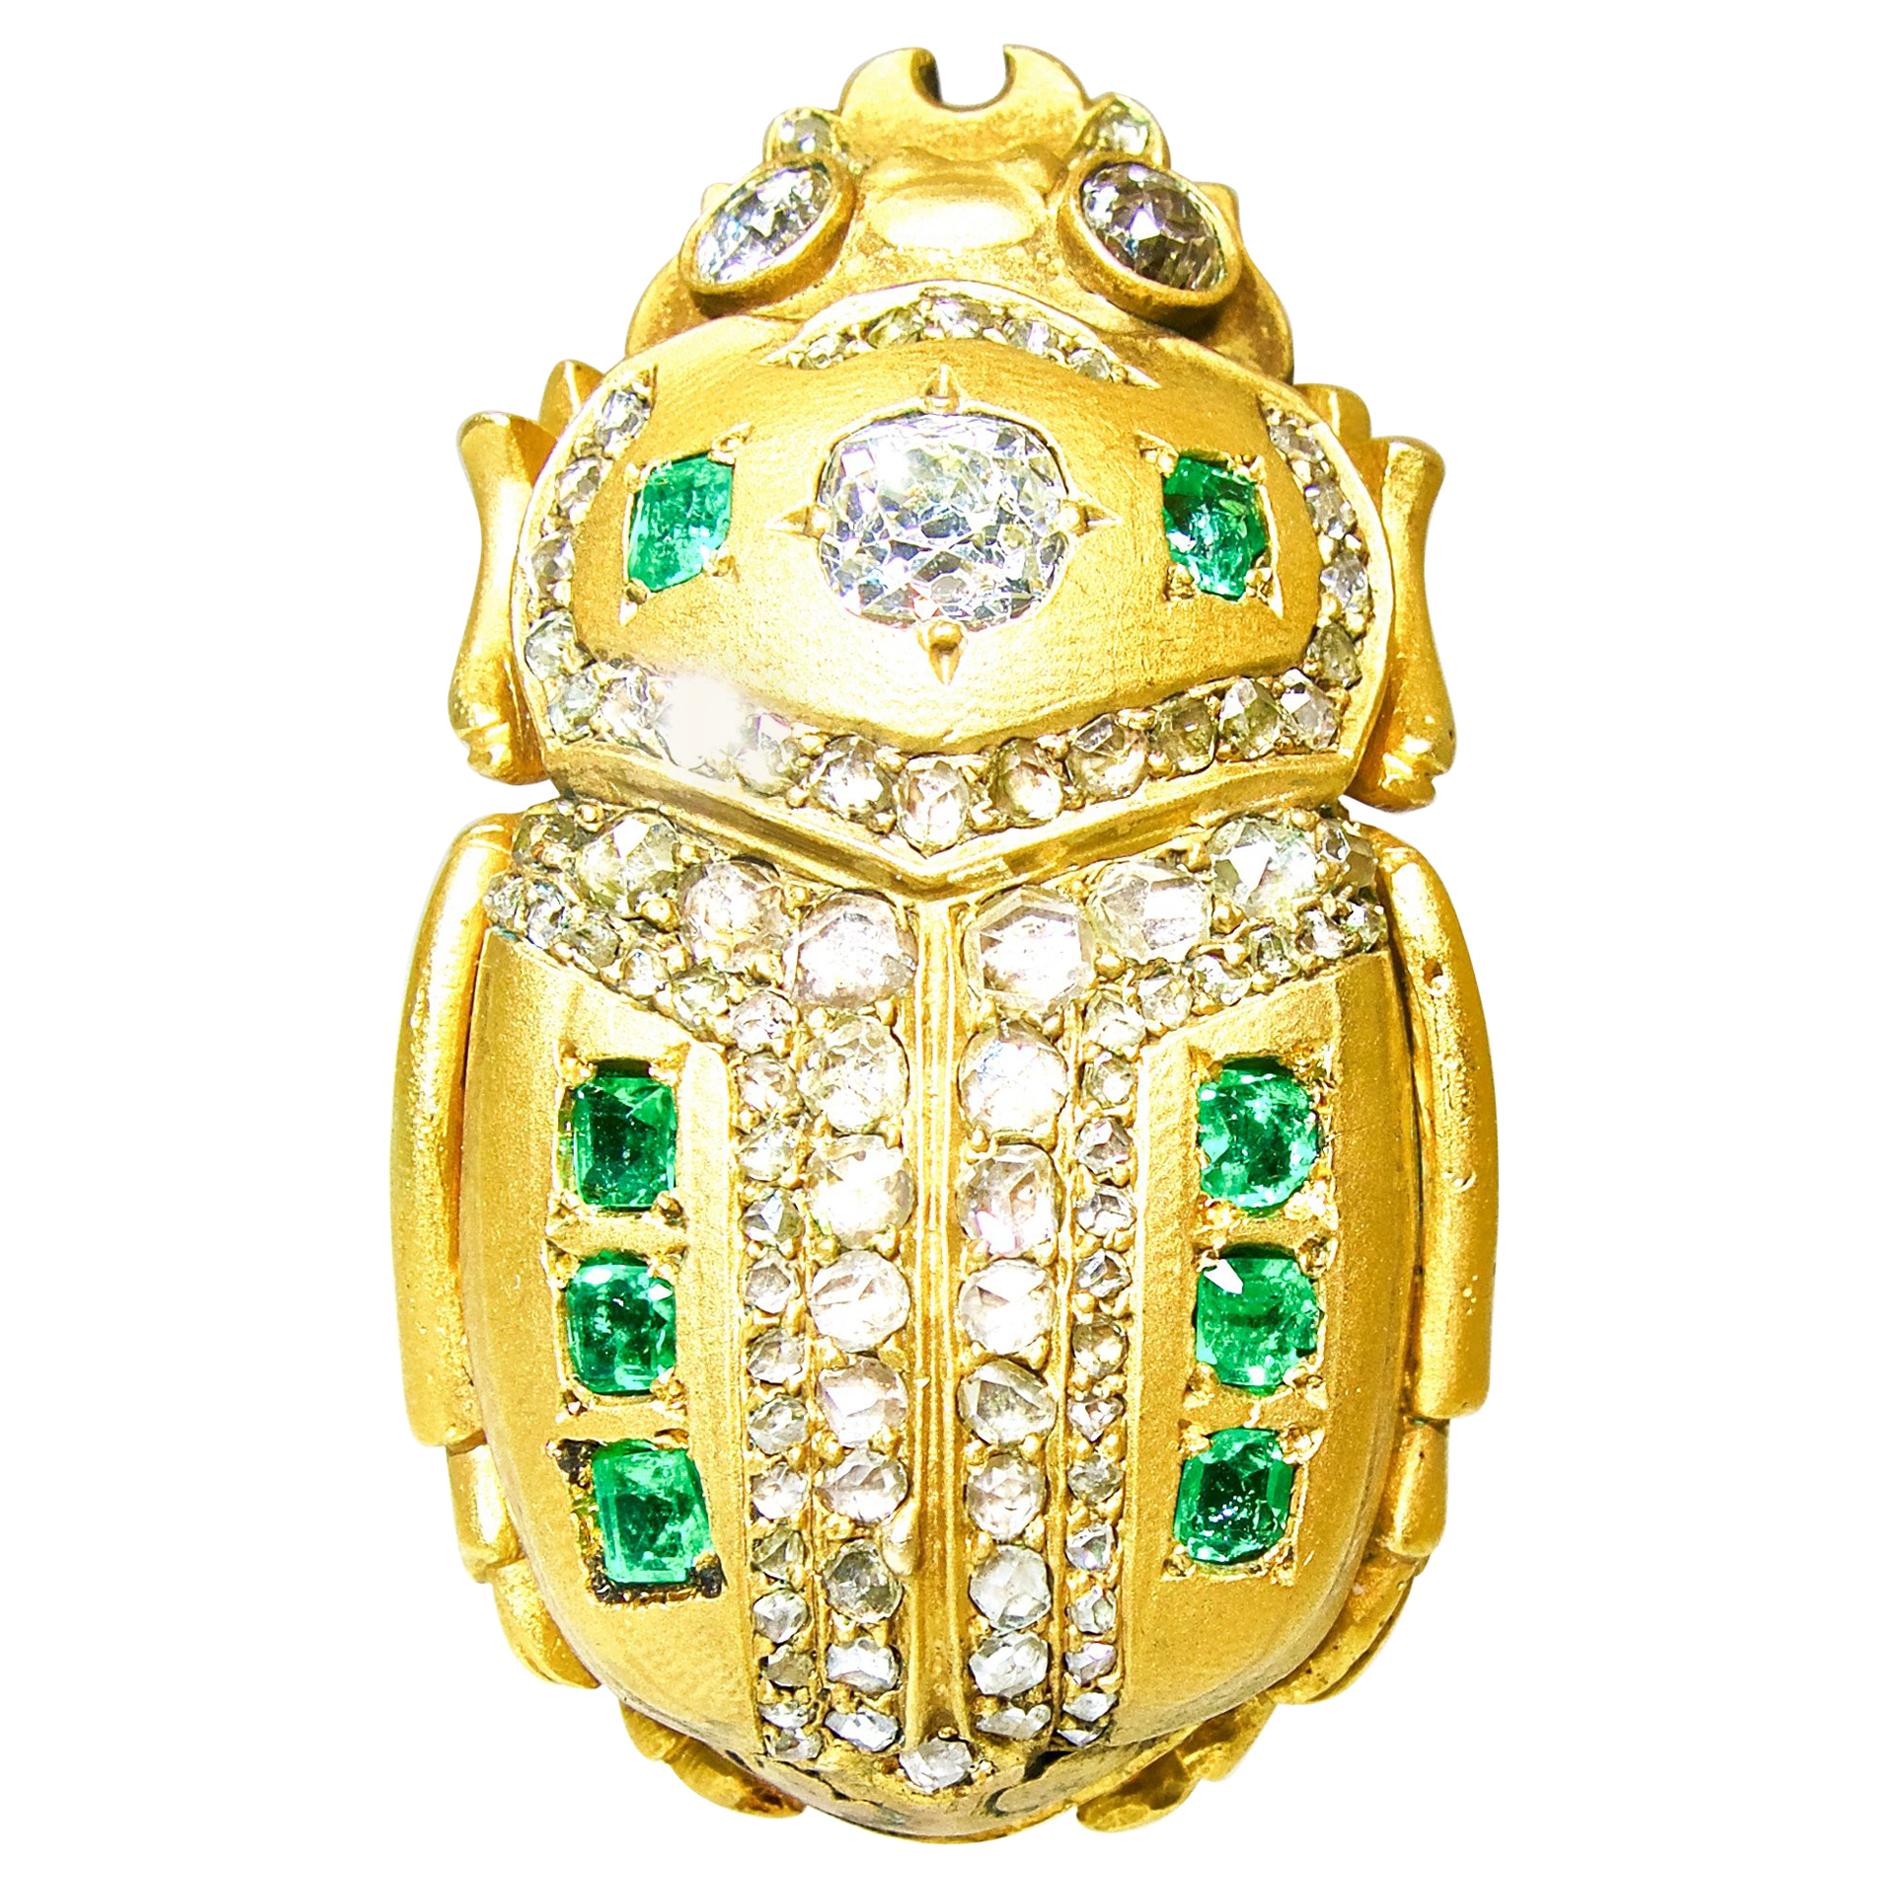 Antique Scarab Brooch with Emeralds and Diamonds, French, circa 1860